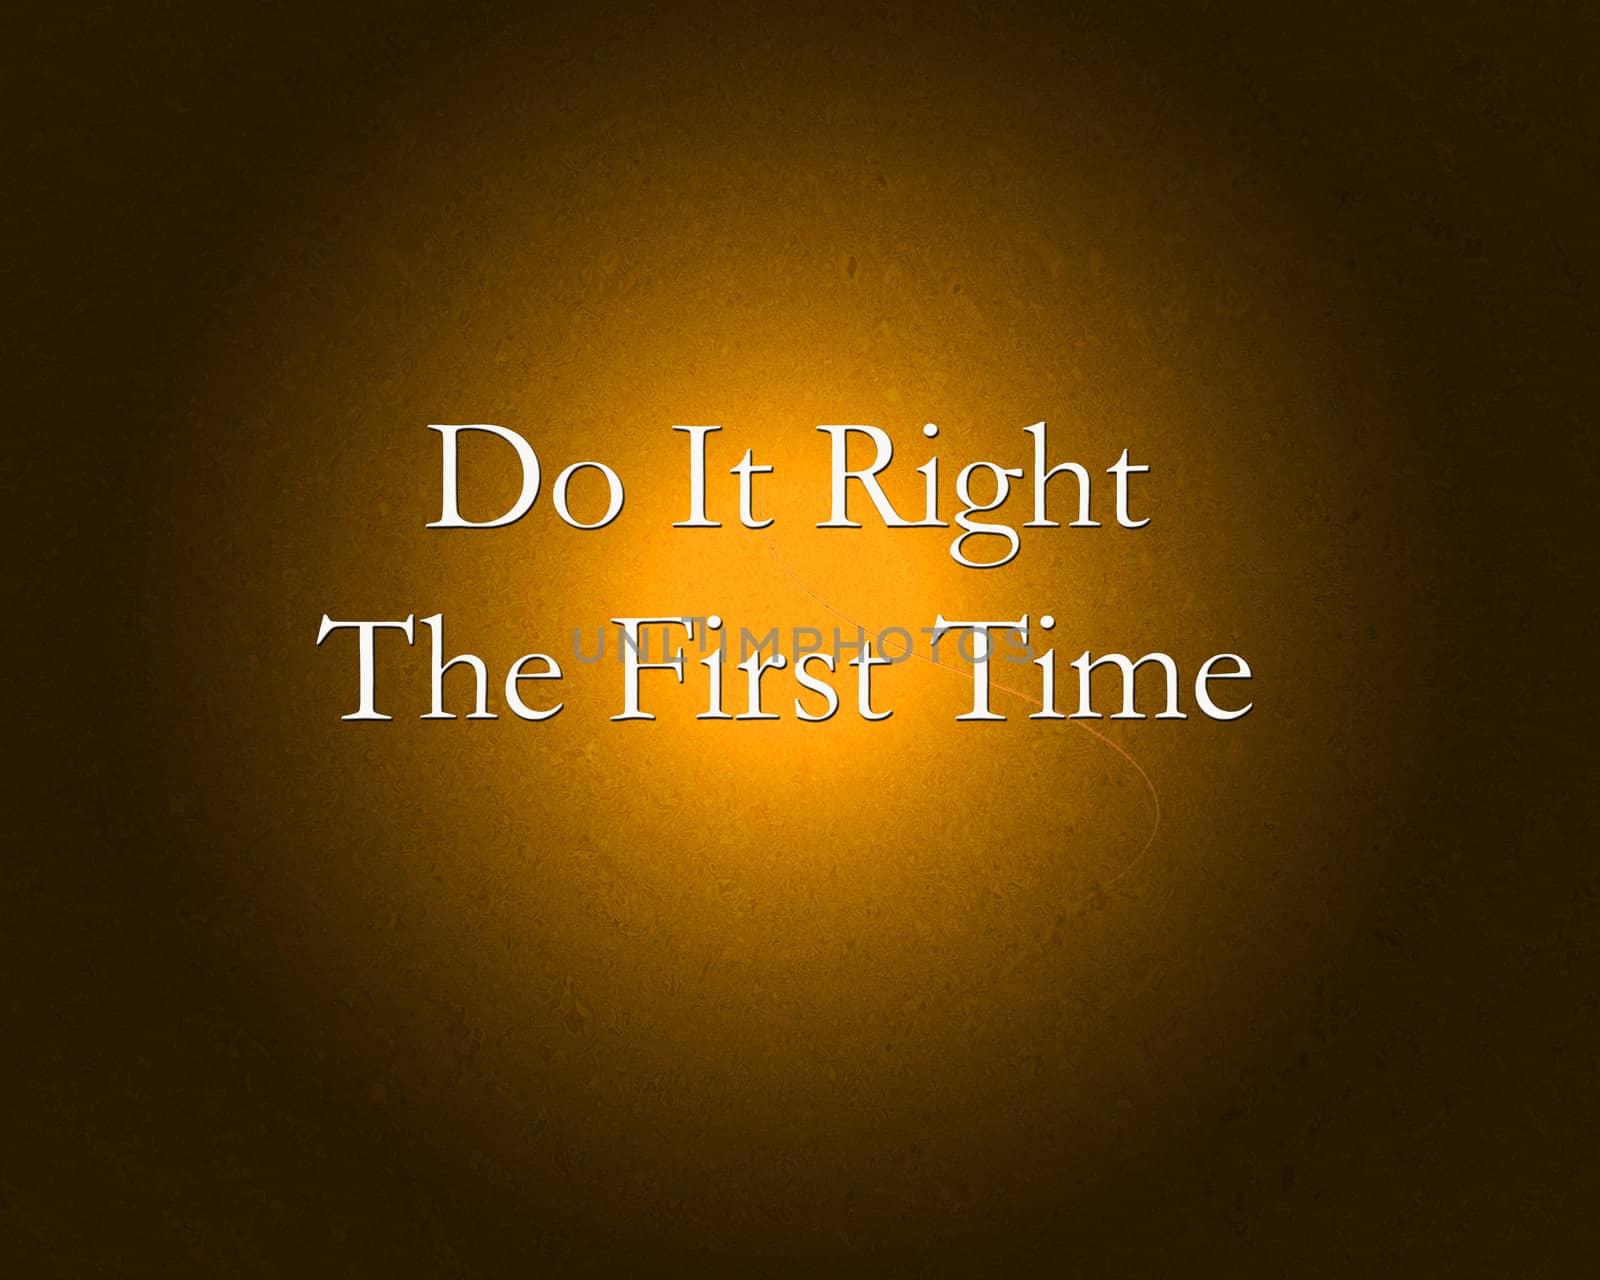 Do it right the first time philosophy.